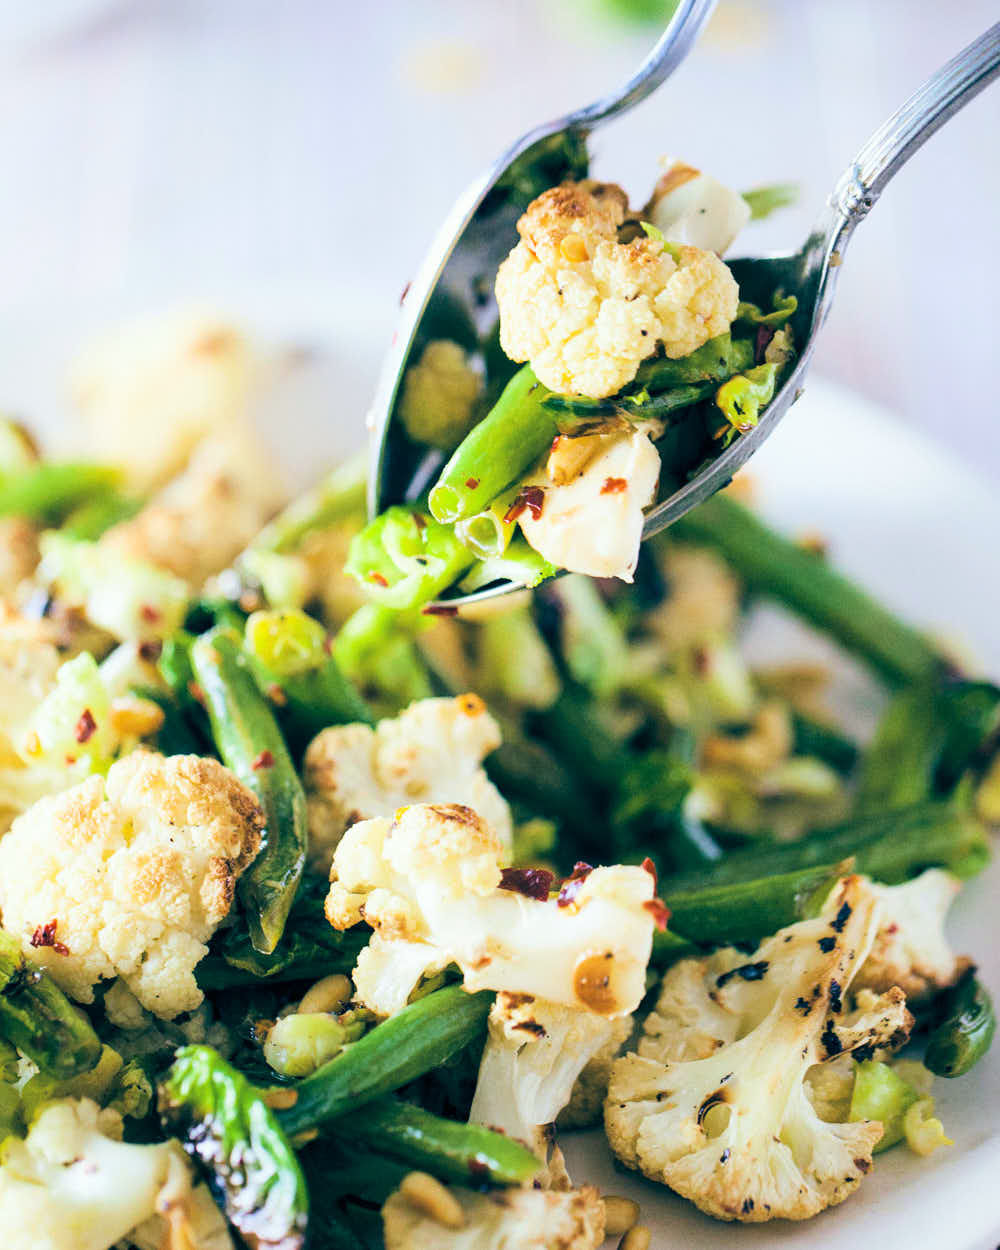 Roasted Cauliflower and Brussels Sprout Salad - Evergreen Kitchen